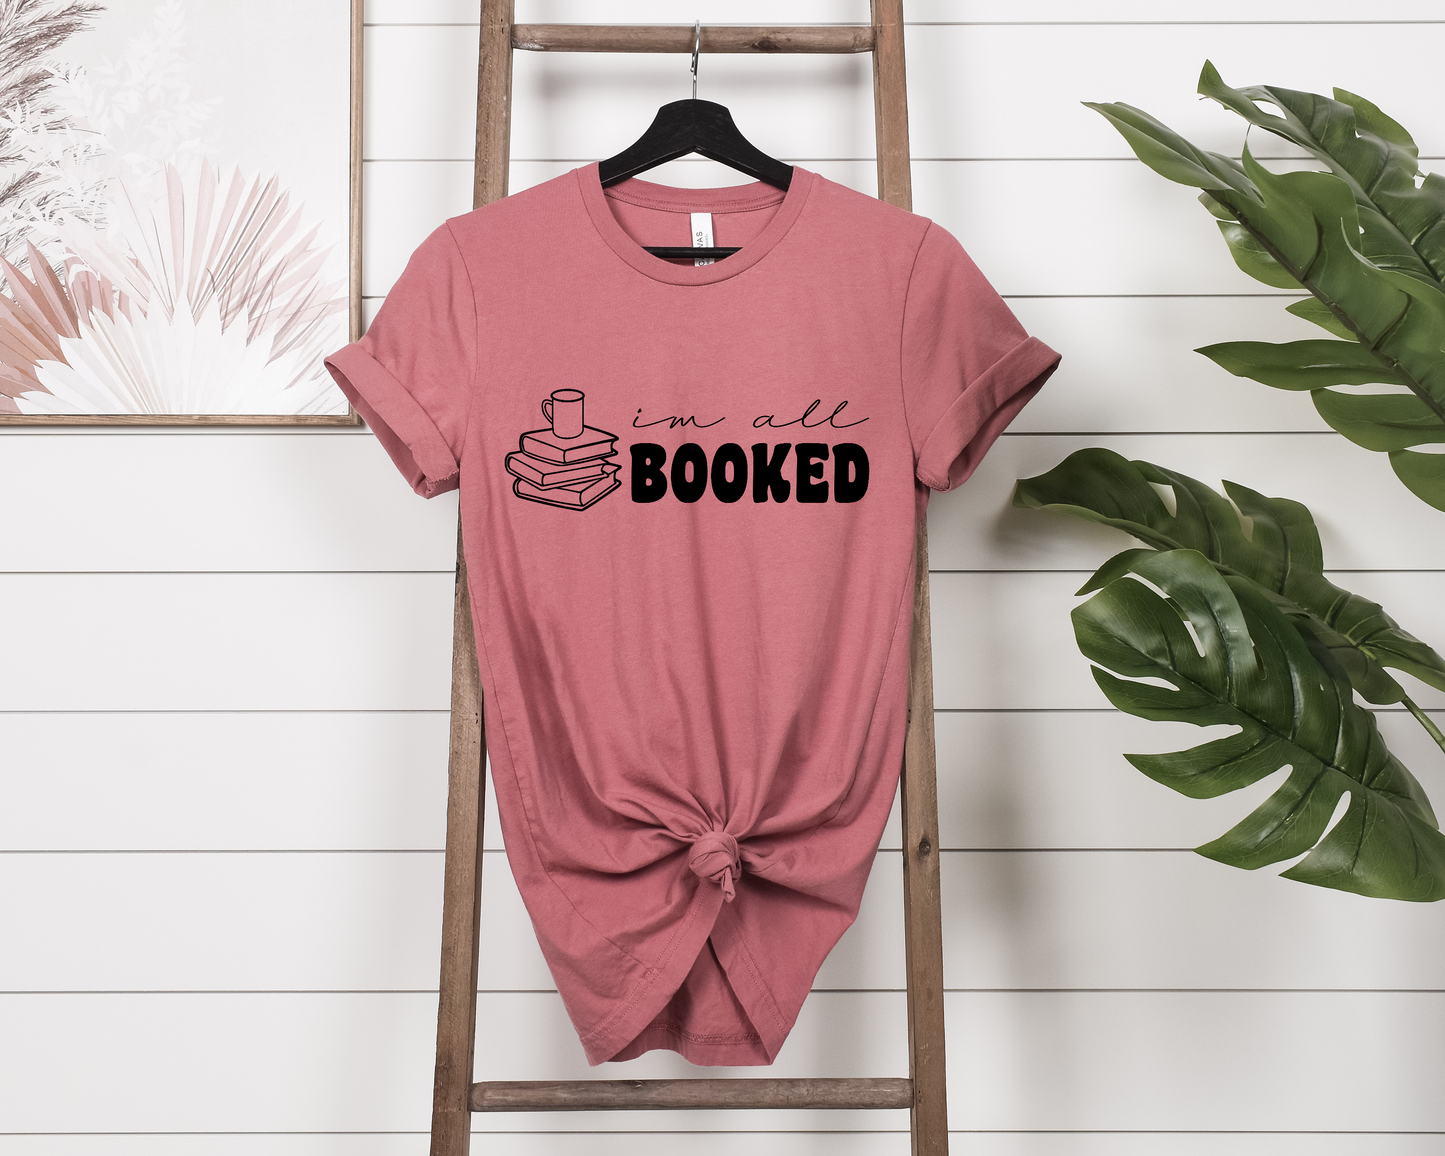 All Booked T-shirt